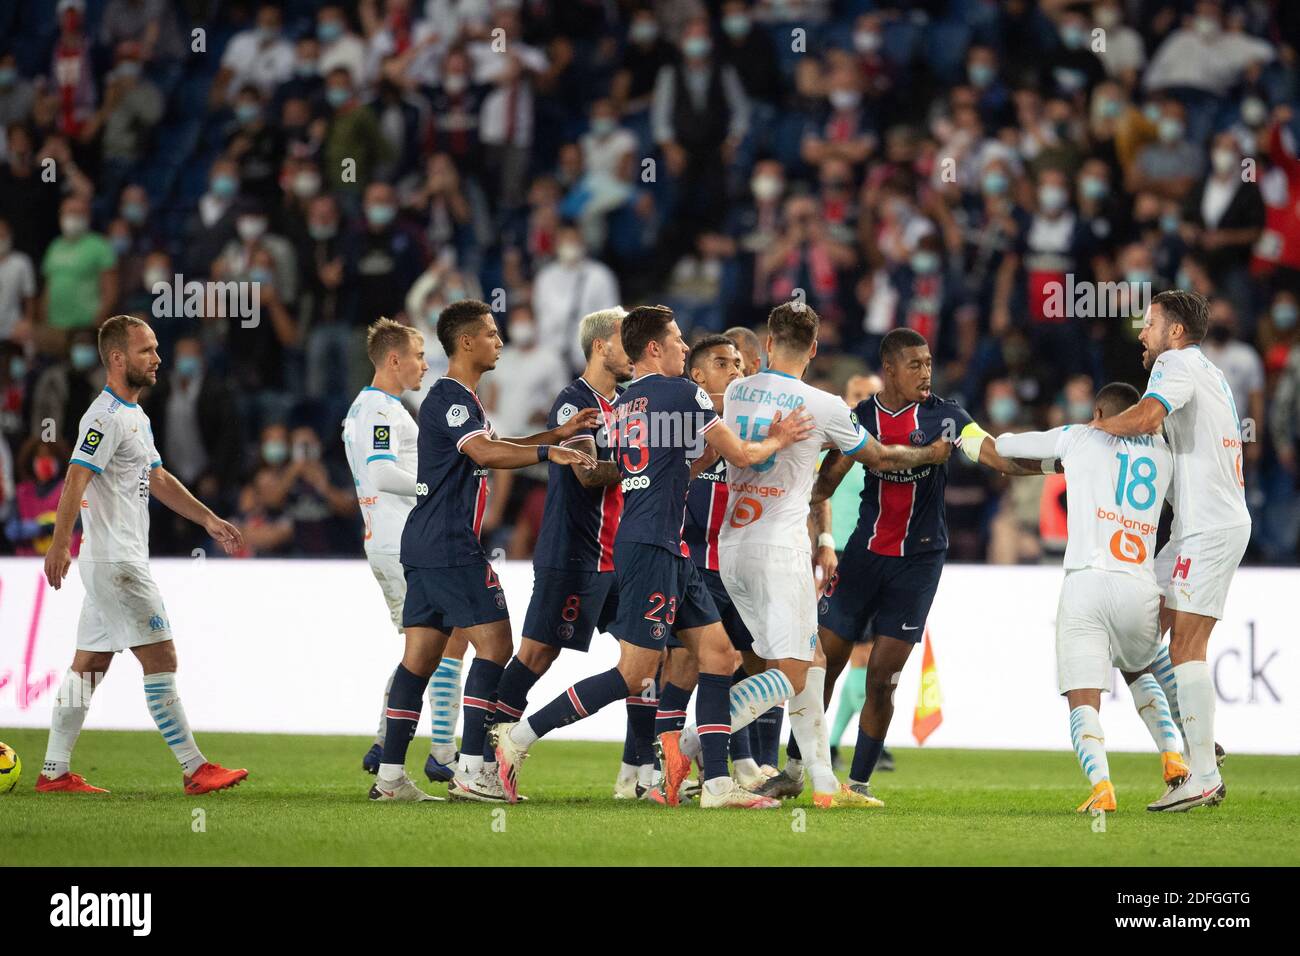 Psg Jordan High Resolution Stock Photography and Images - Alamy